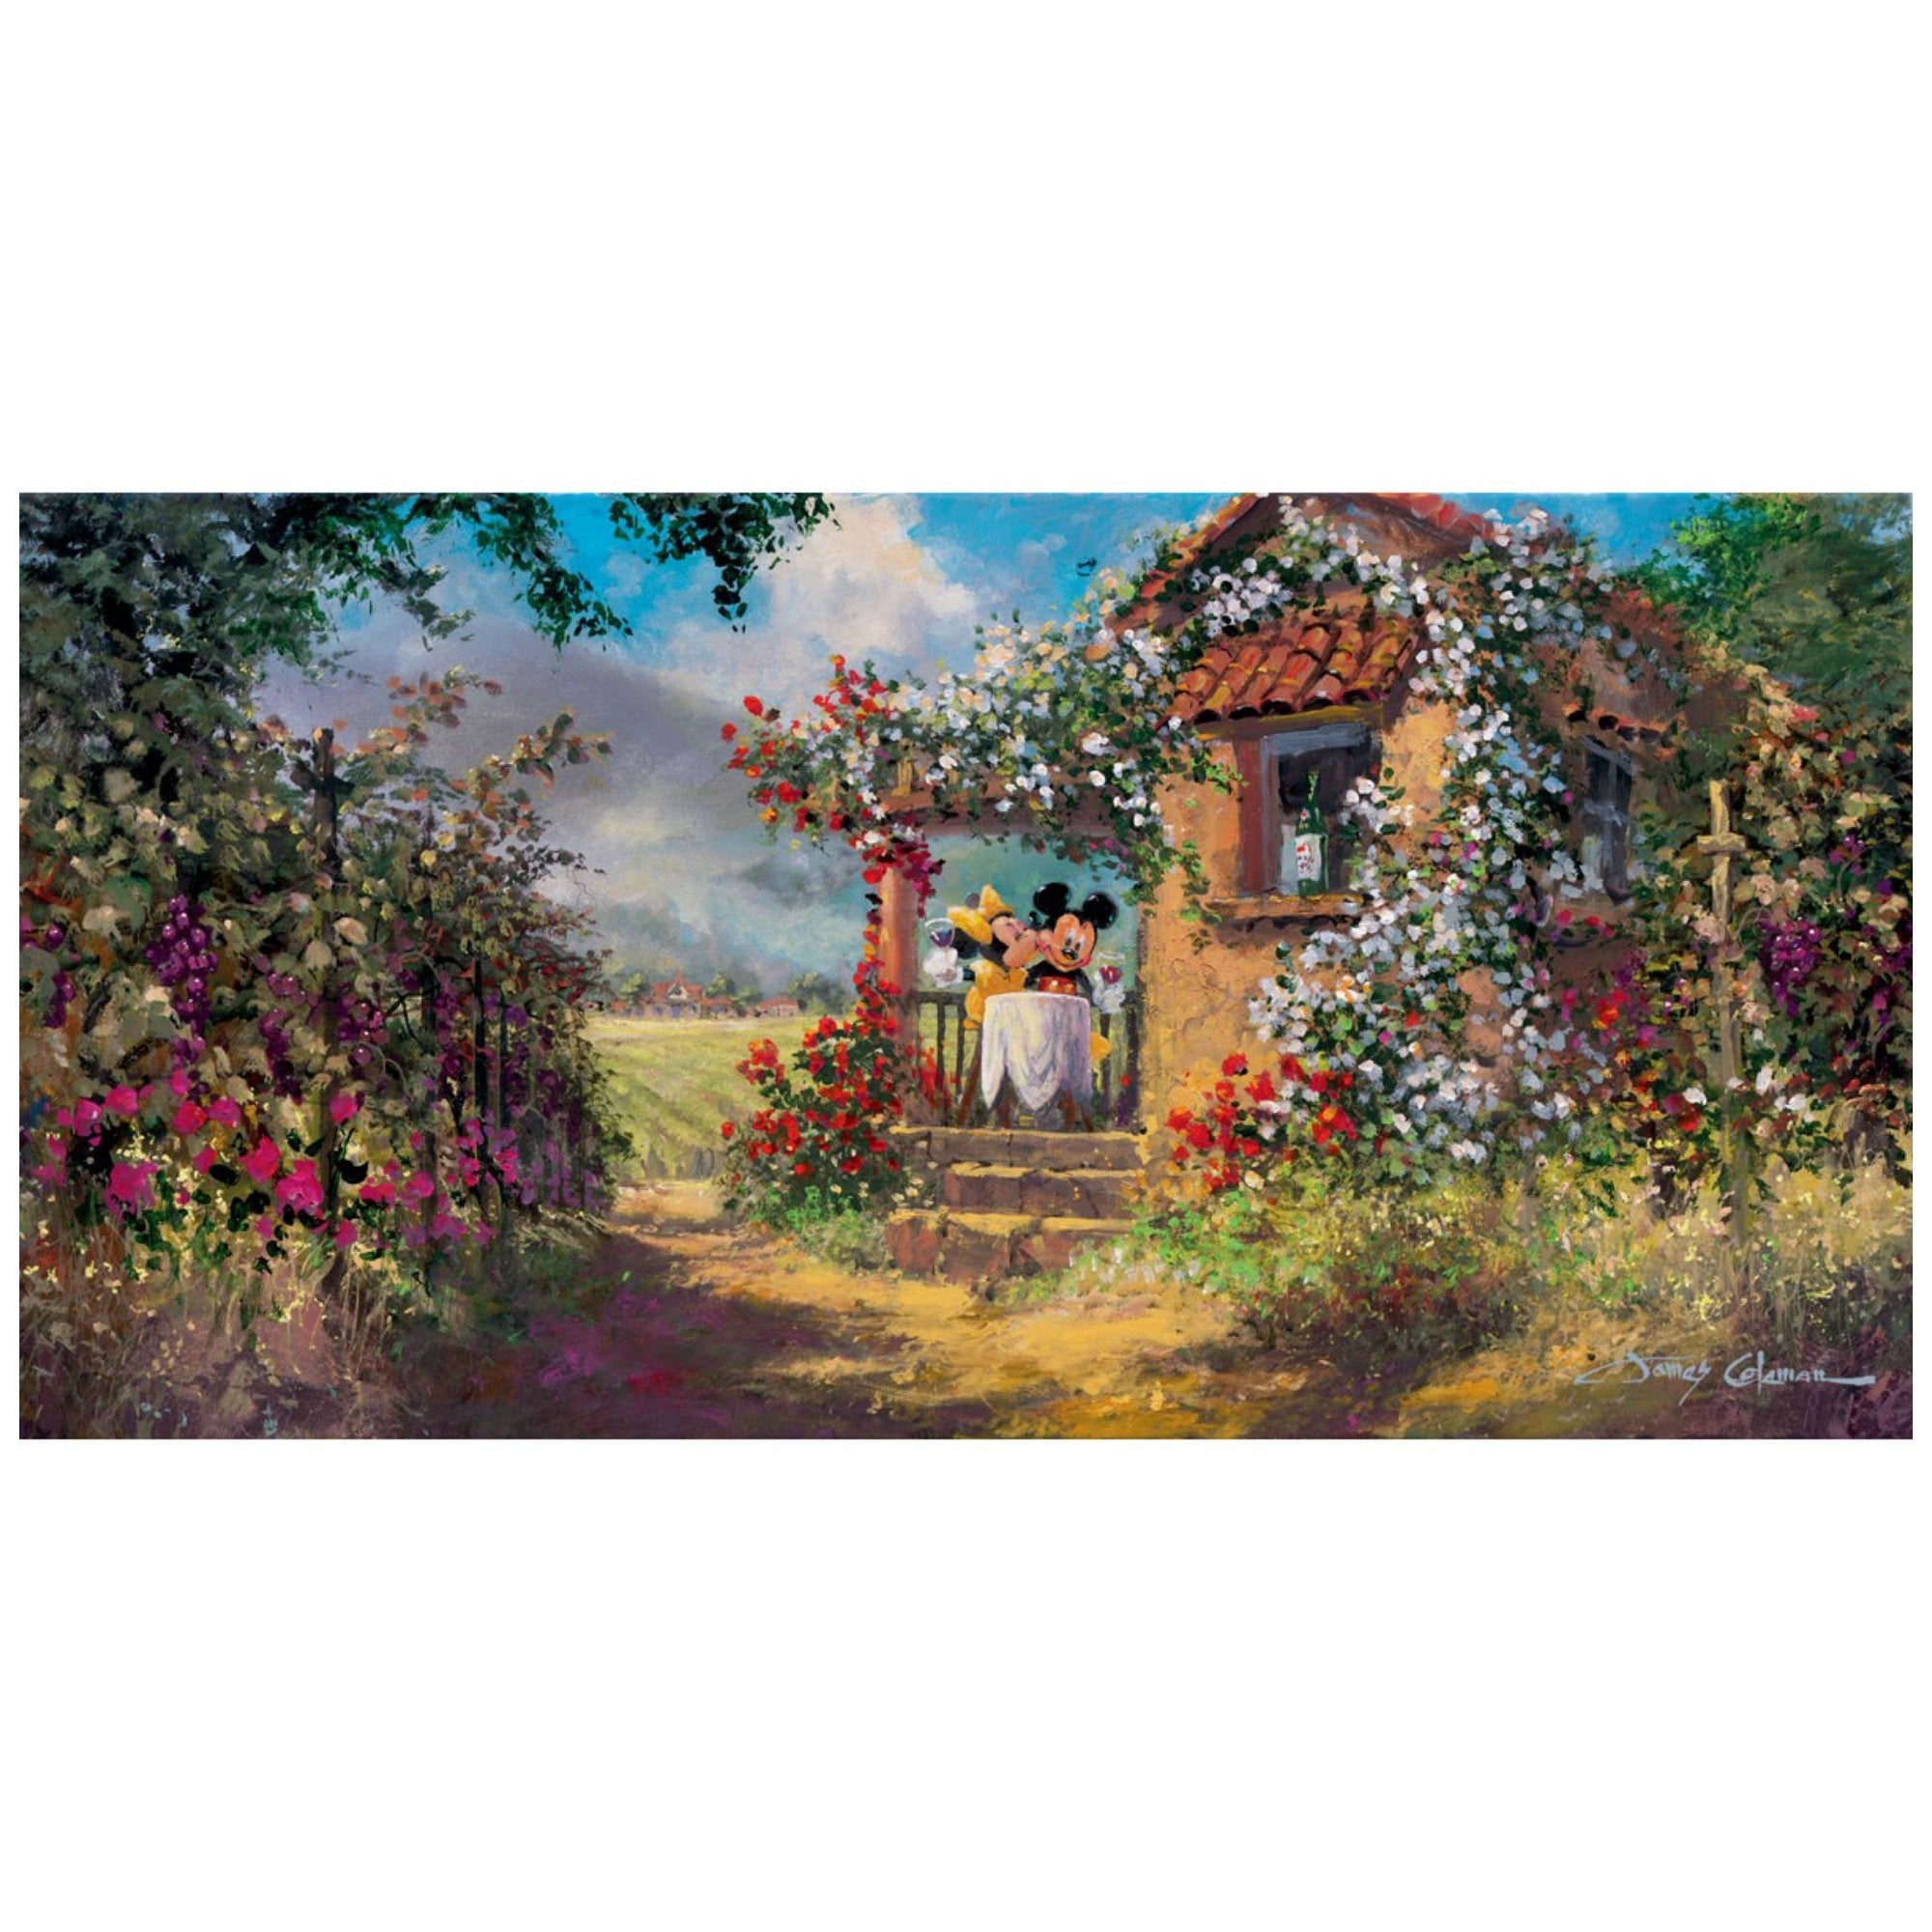 Our Old Familiar Place by James Coleman  Minnie gives Mickey a kiss on the cheeks, as they enjoy a beautiful day at the quaint garden cottage.